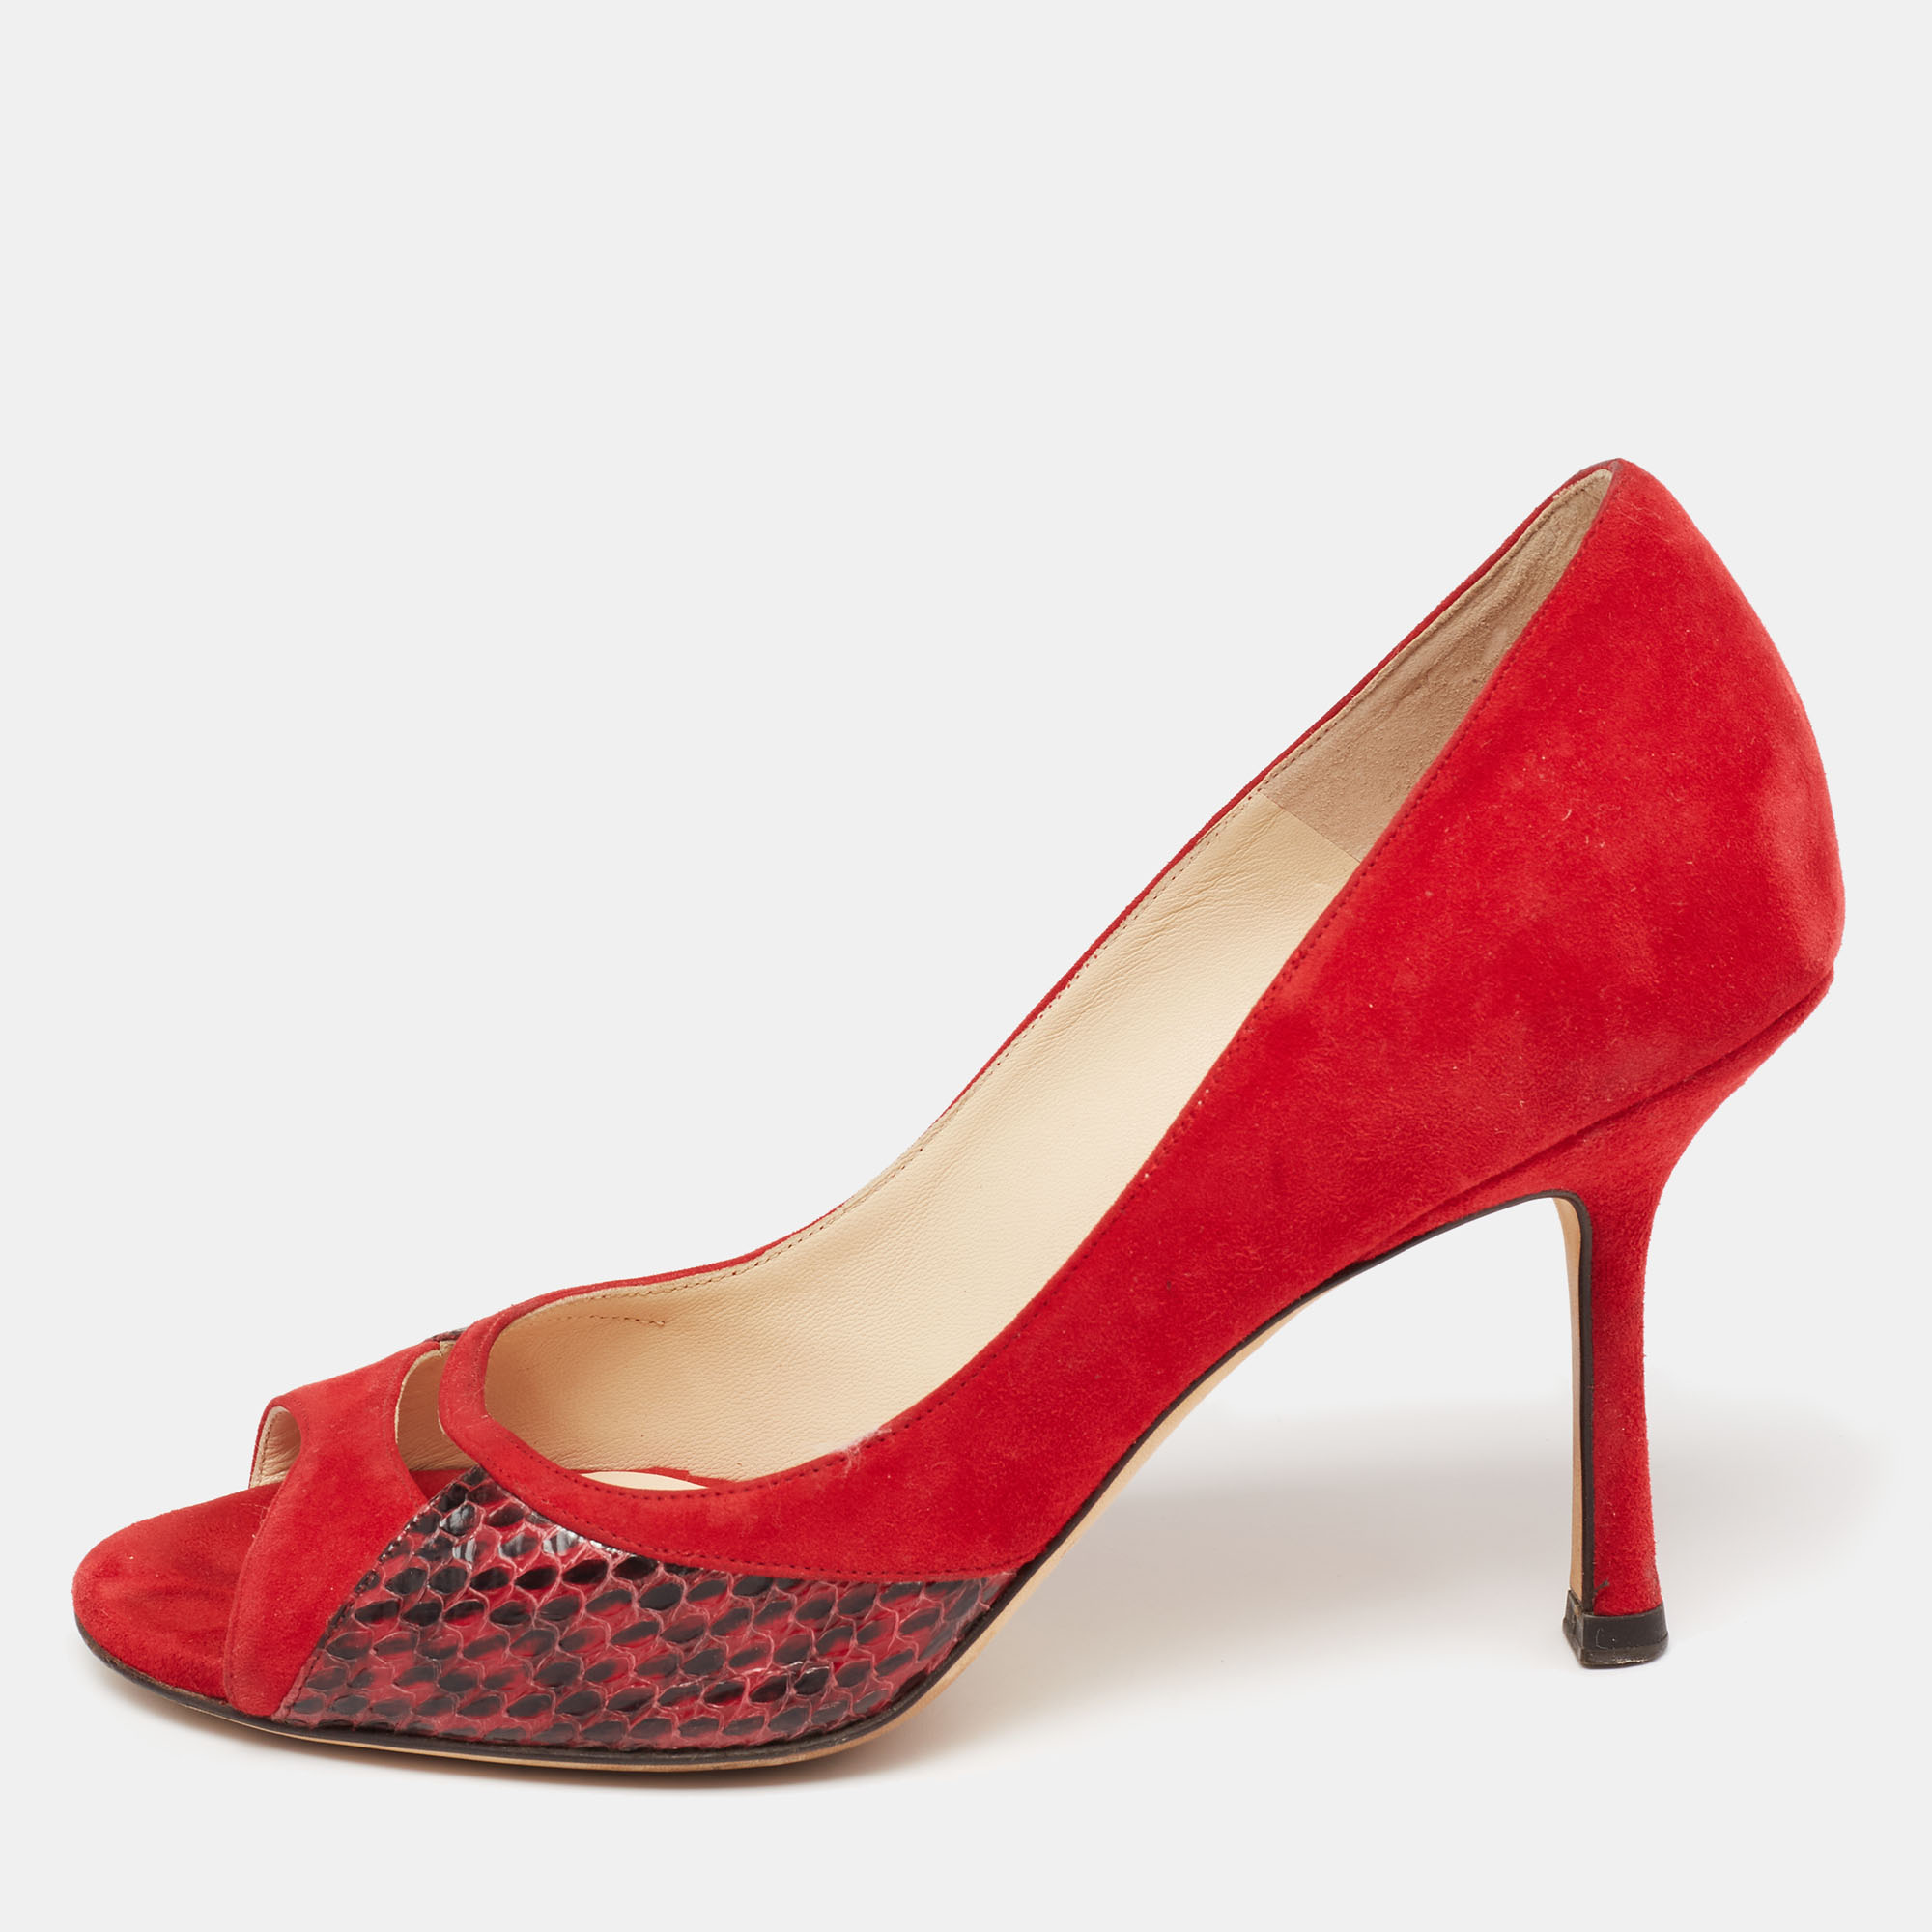 Pre-owned Jimmy Choo Red Suede And Snakeskin Peep Toe Pumps Size 37.5